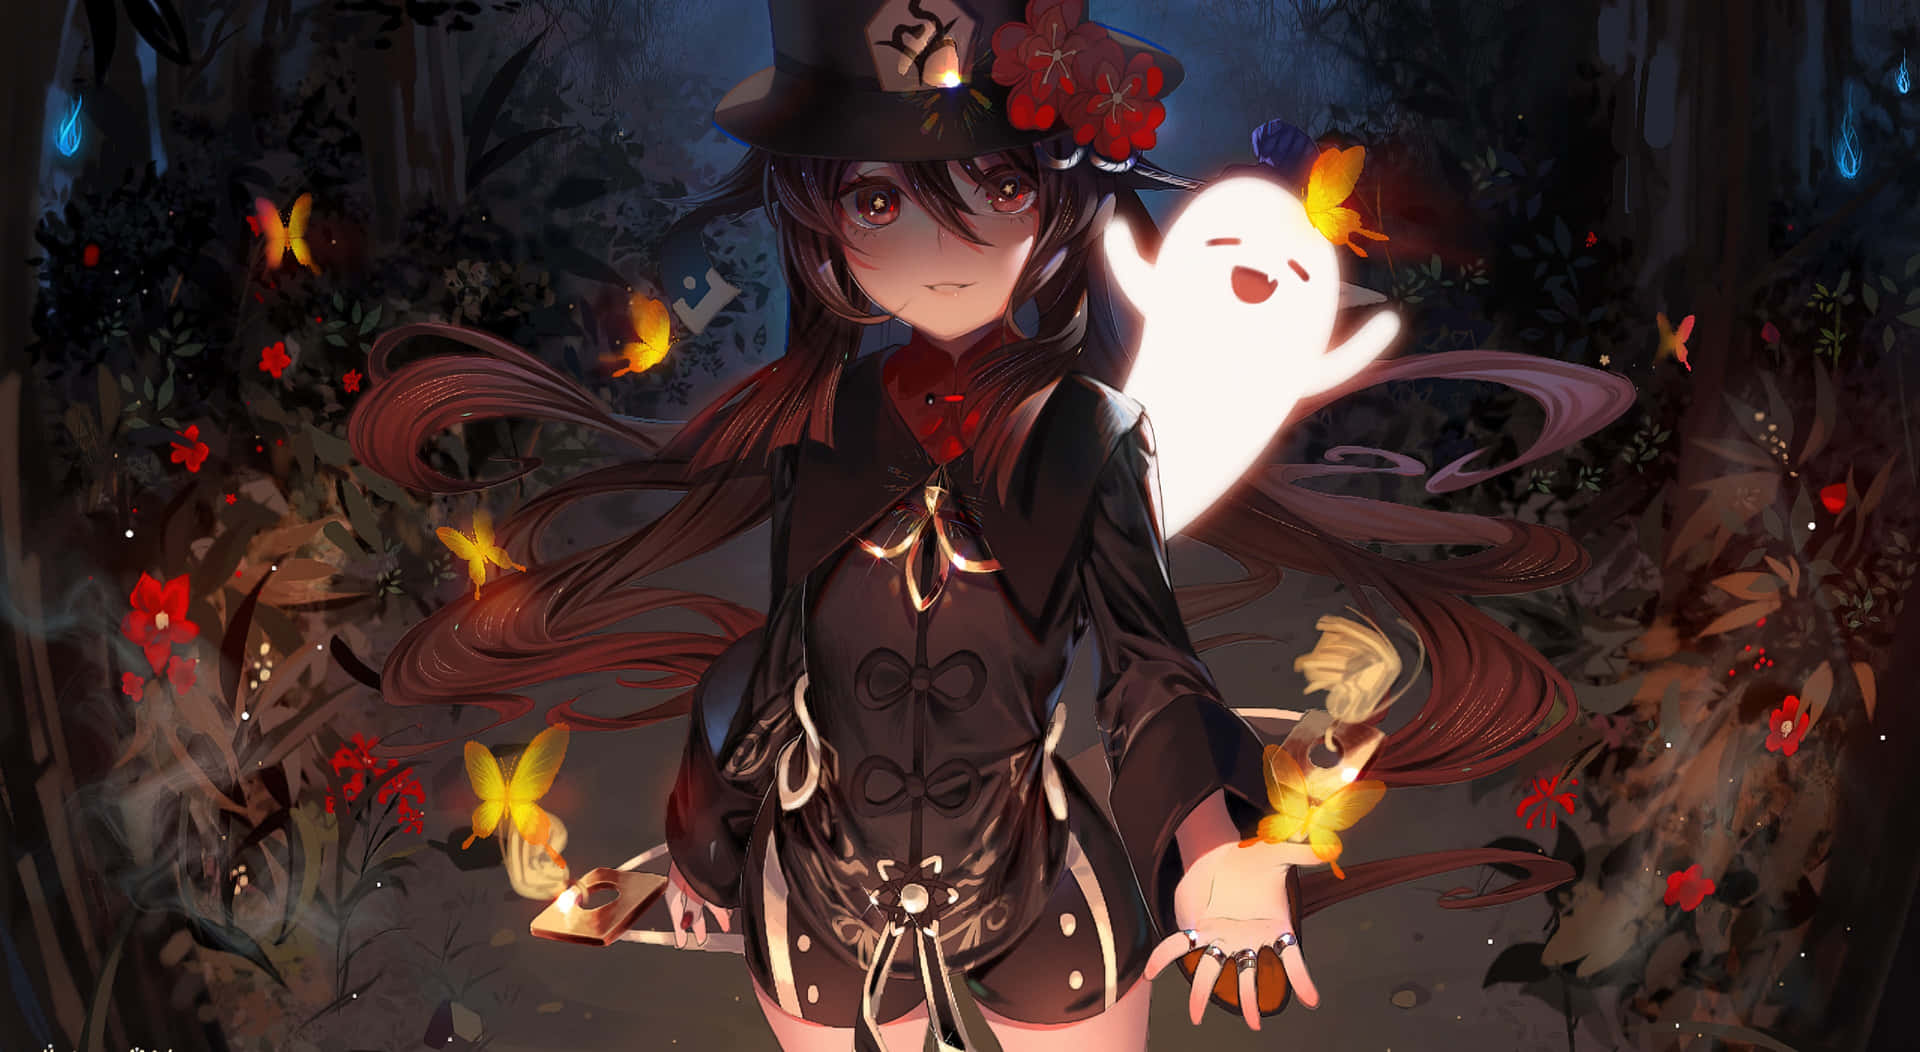 A Girl In A Top Hat And A Hat With Flames